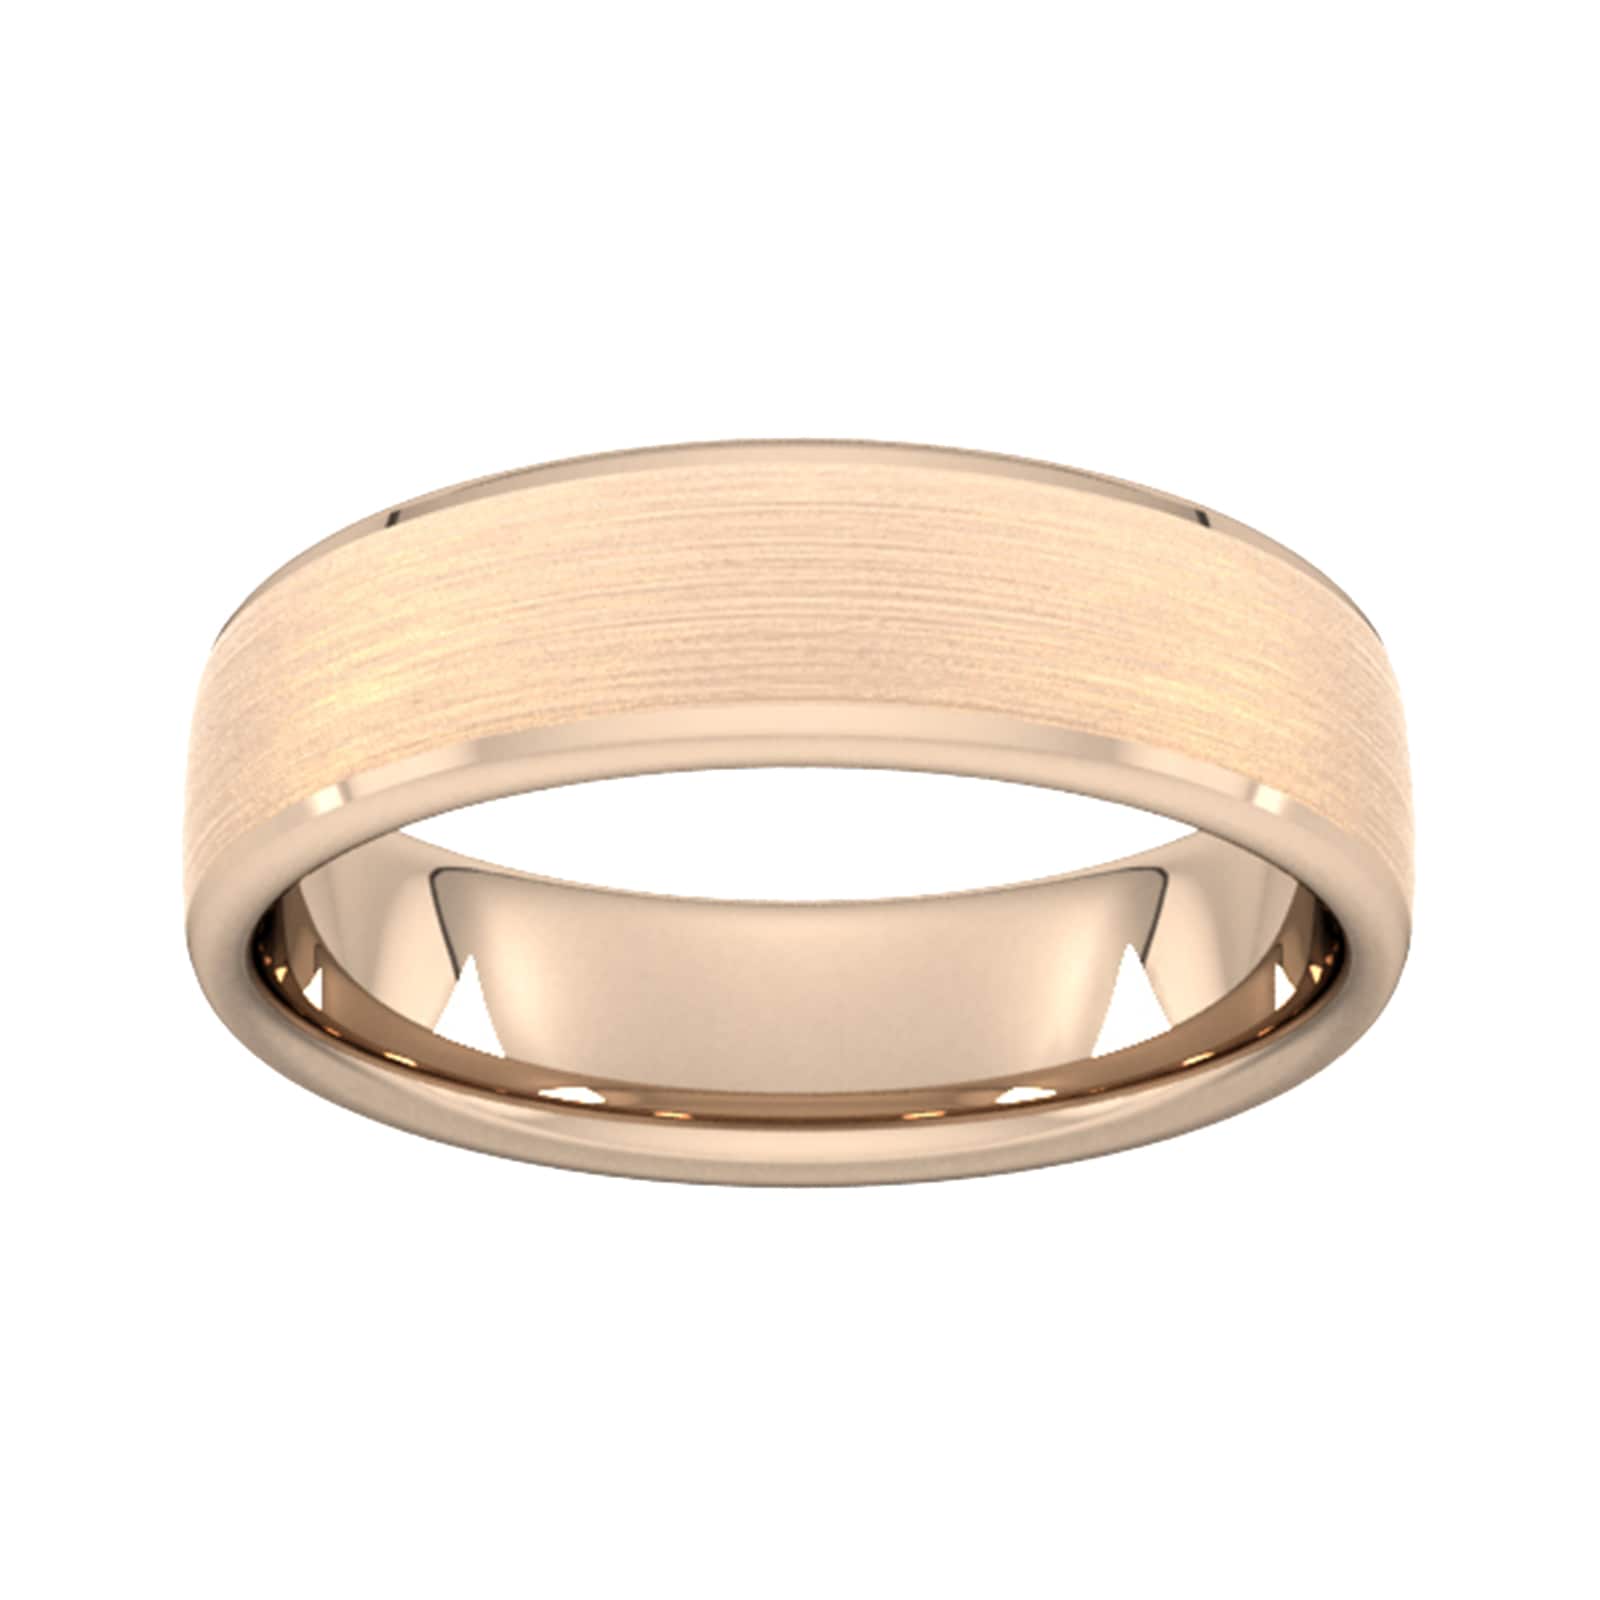 6mm Traditional Court Heavy Polished Chamfered Edges With Matt Centre Wedding Ring In 18 Carat Rose Gold - Ring Size Q